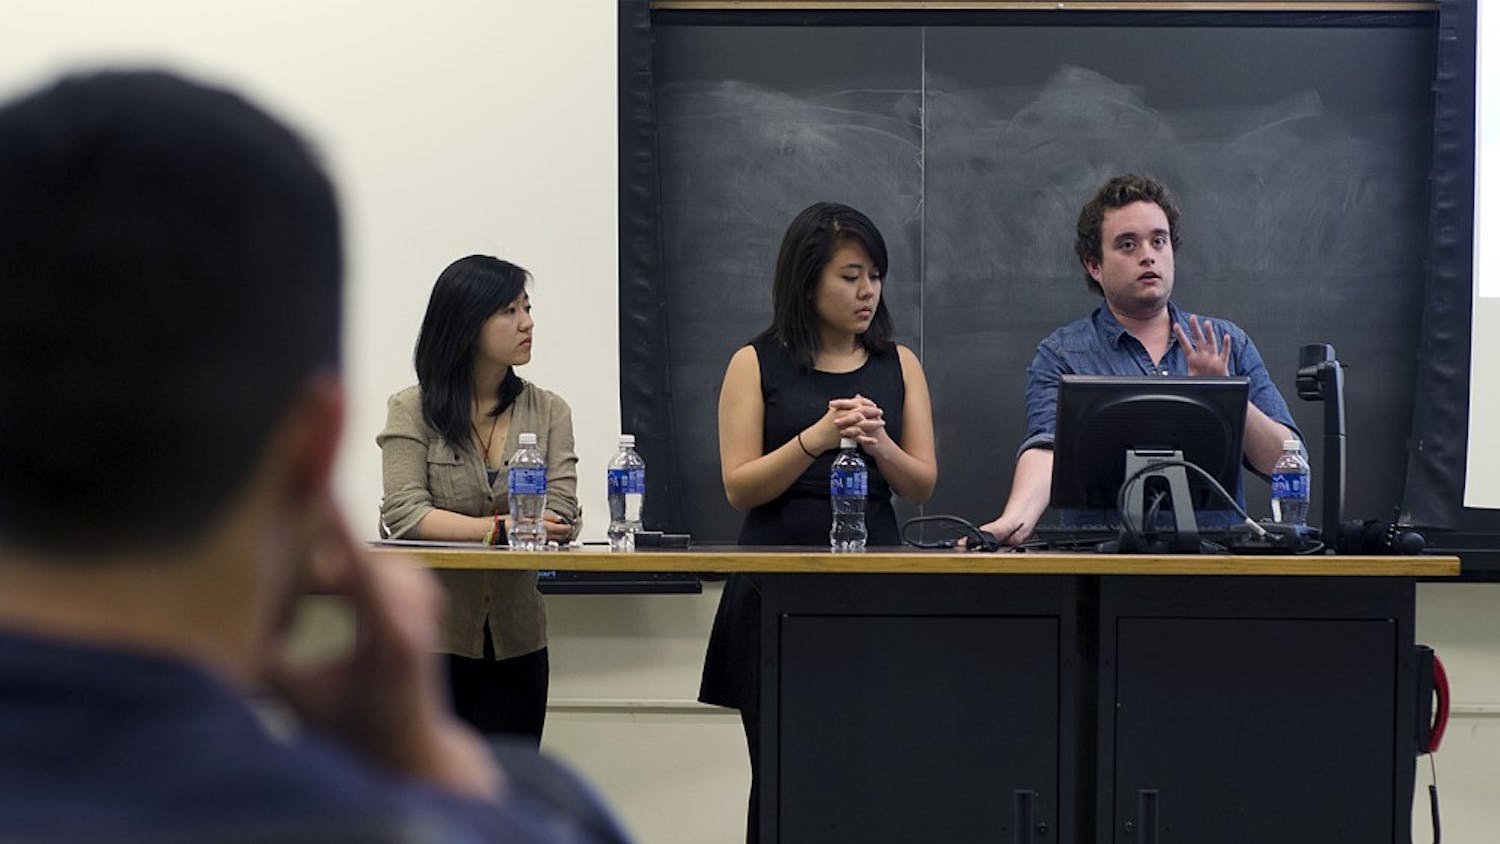 During "Sharing Our Experiences," Anan Zhou, co-chair of Project Dinah; Kaori Sueyoshi, founder of SURGE; and Wilson Hood, managing editor of The Siren, shared their thoughts on topics ranging from reproductive justice to gender neutral housing.